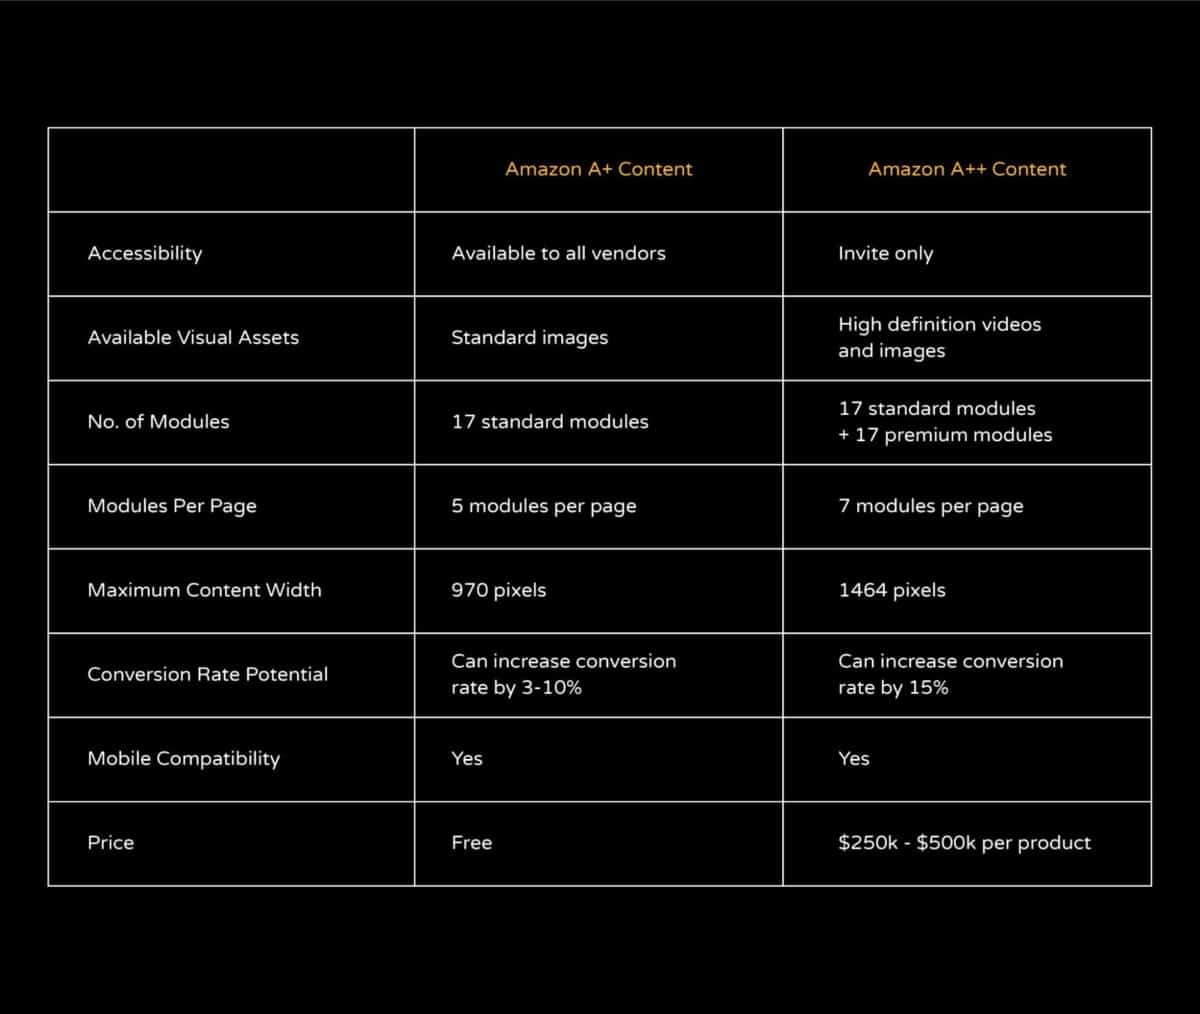 Amazon A+ and A++ Content differences in comparison table